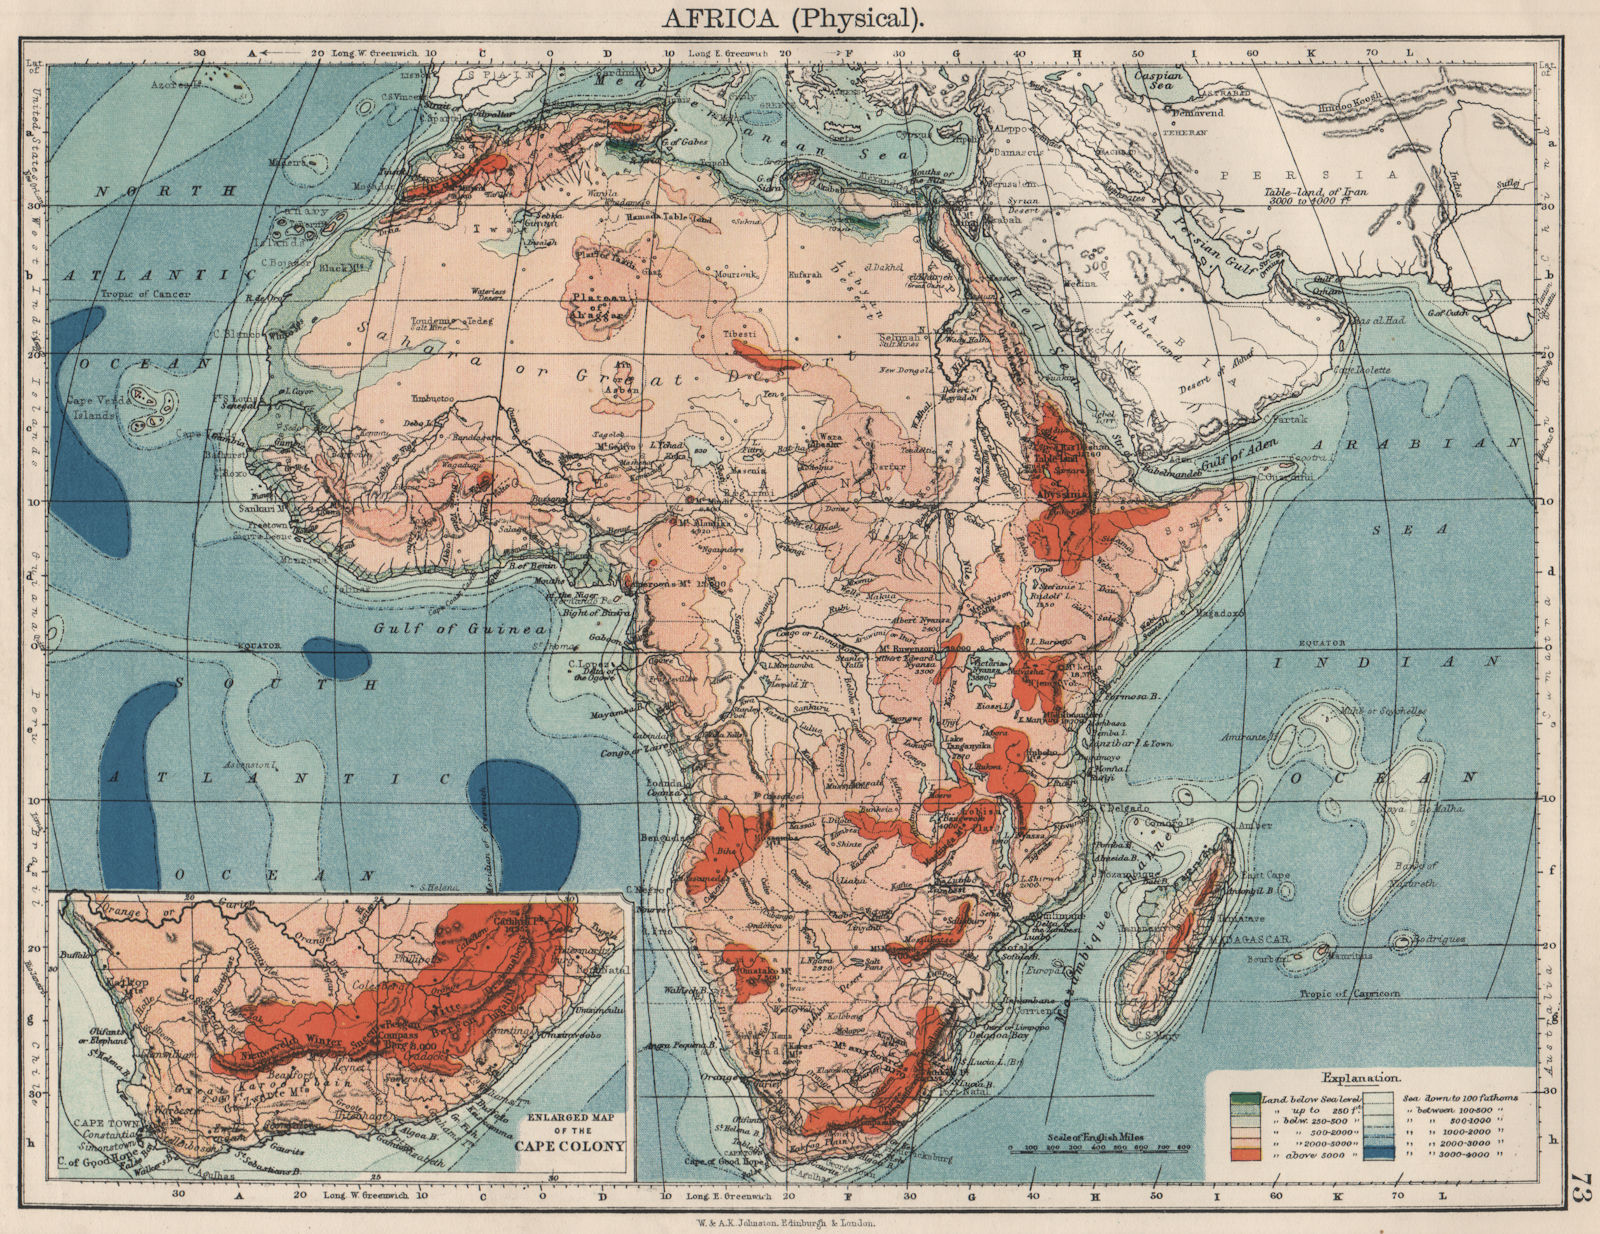 Associate Product AFRICA PHYSICAL. Relief ocean depths rivers. JOHNSTON 1900 old antique map